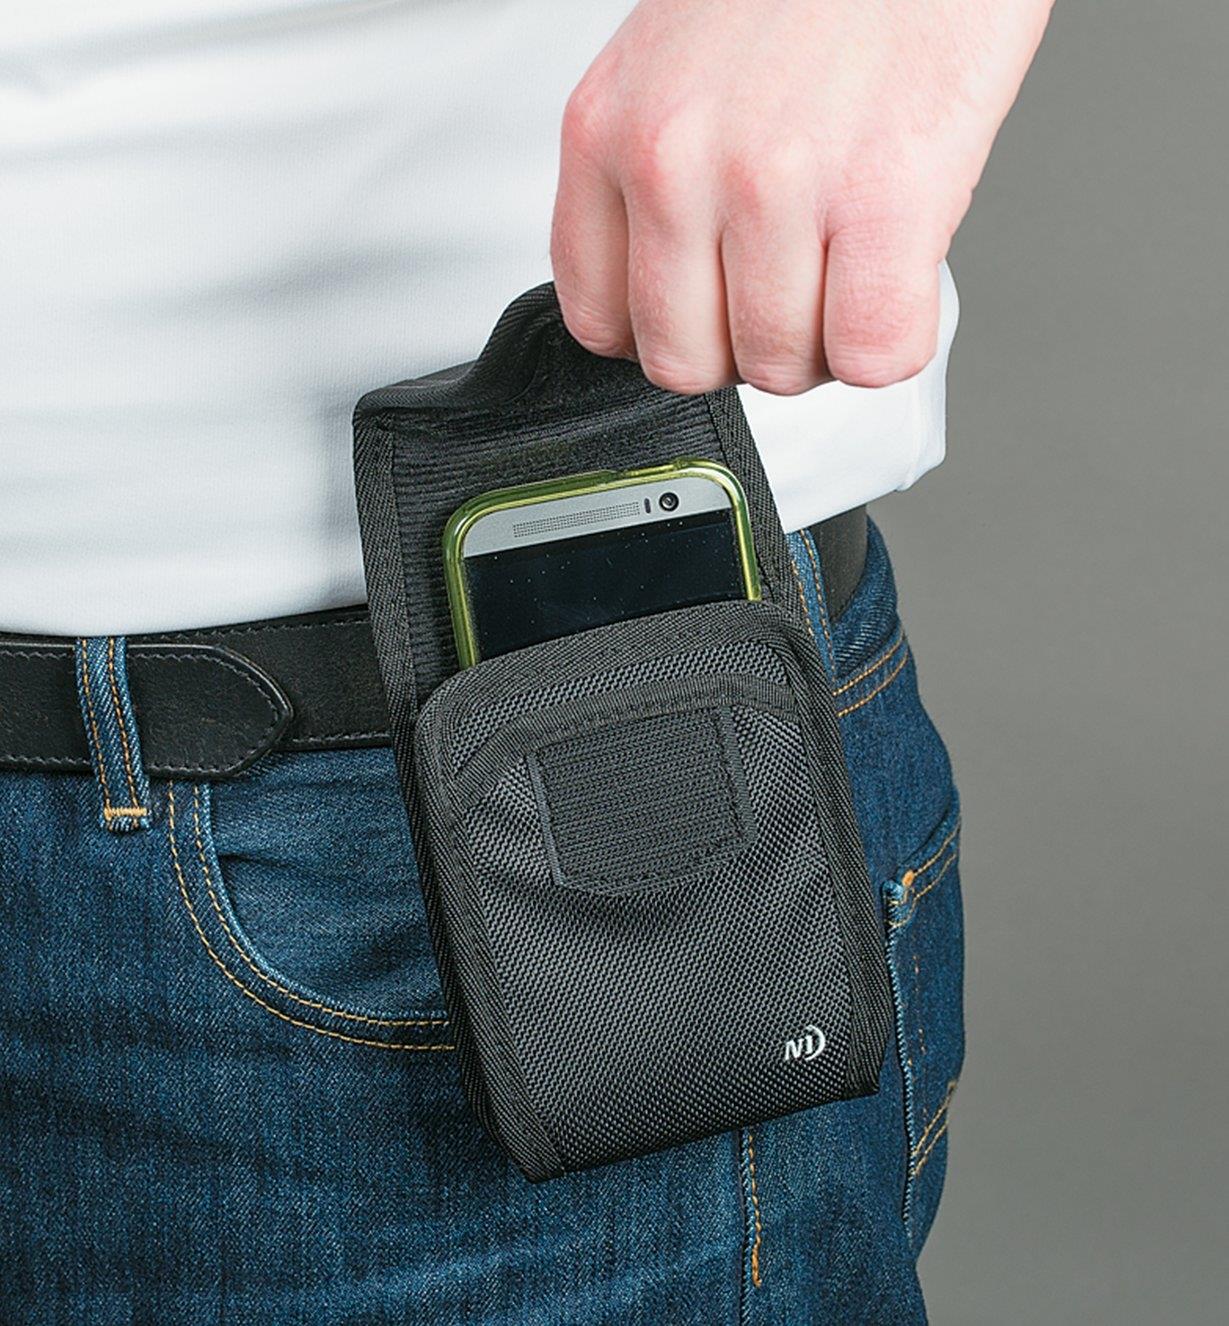 68K0636 - Large Smartphone Clip Case, Holster-Style